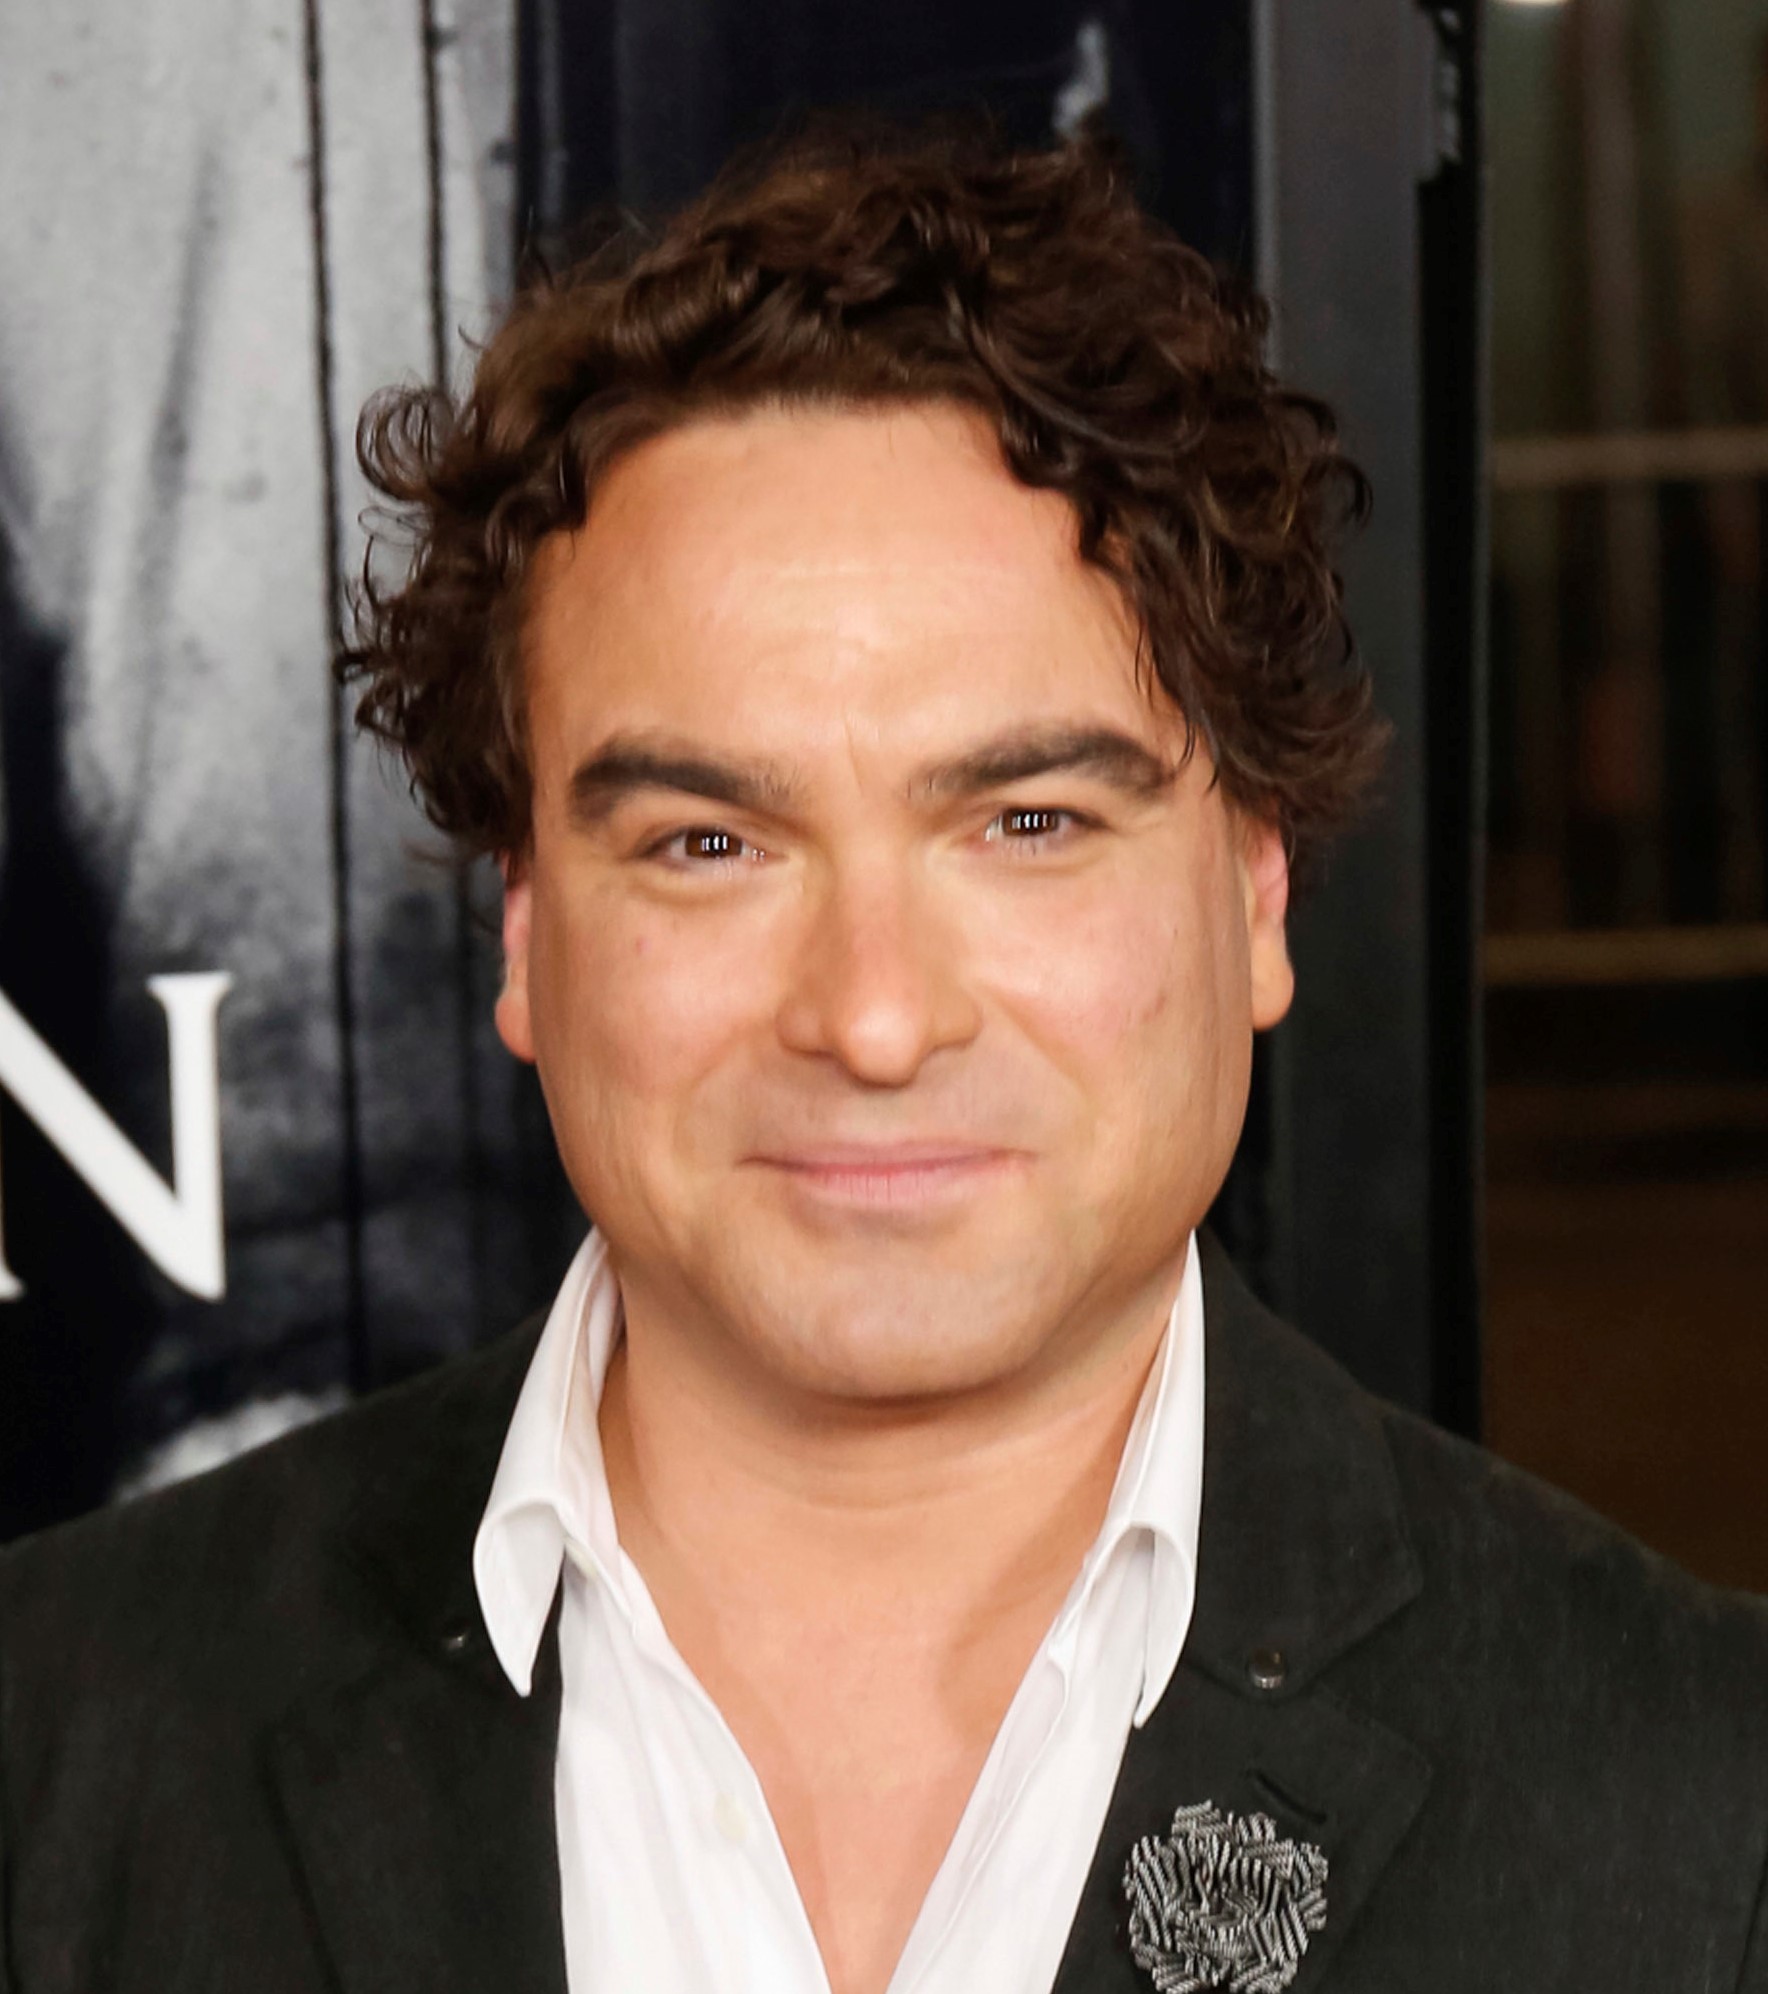 Galecki plays Dr. Leonard Hofstadter on the show, one of the most popular o...